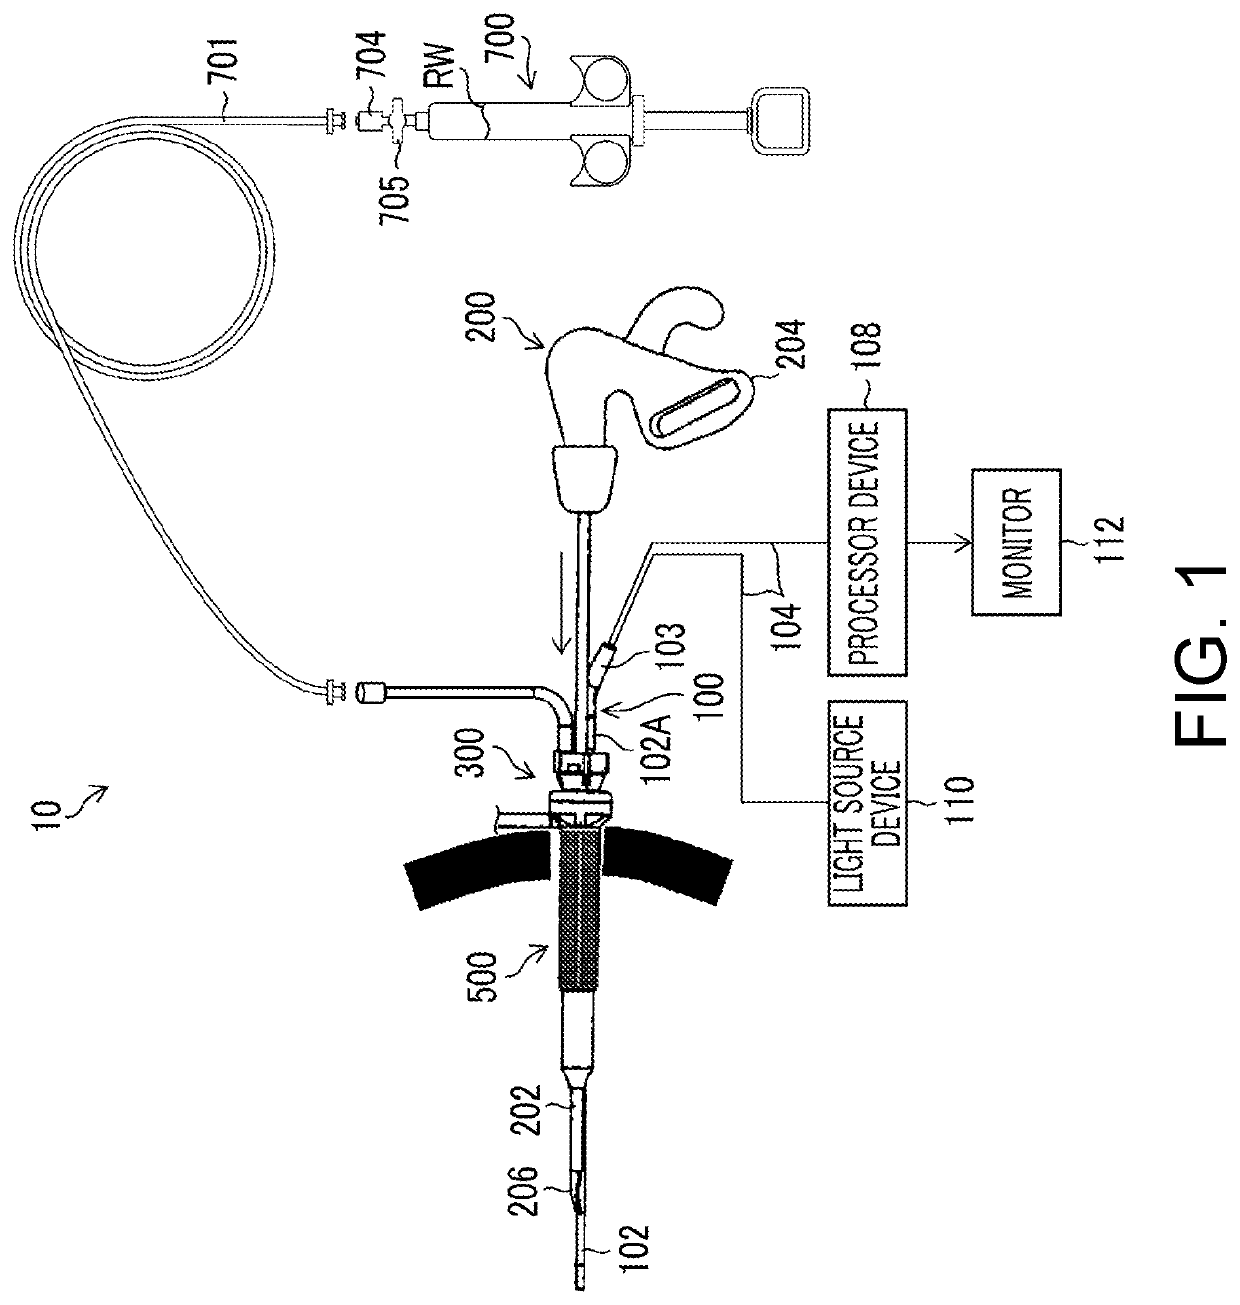 Method of operating surgical system